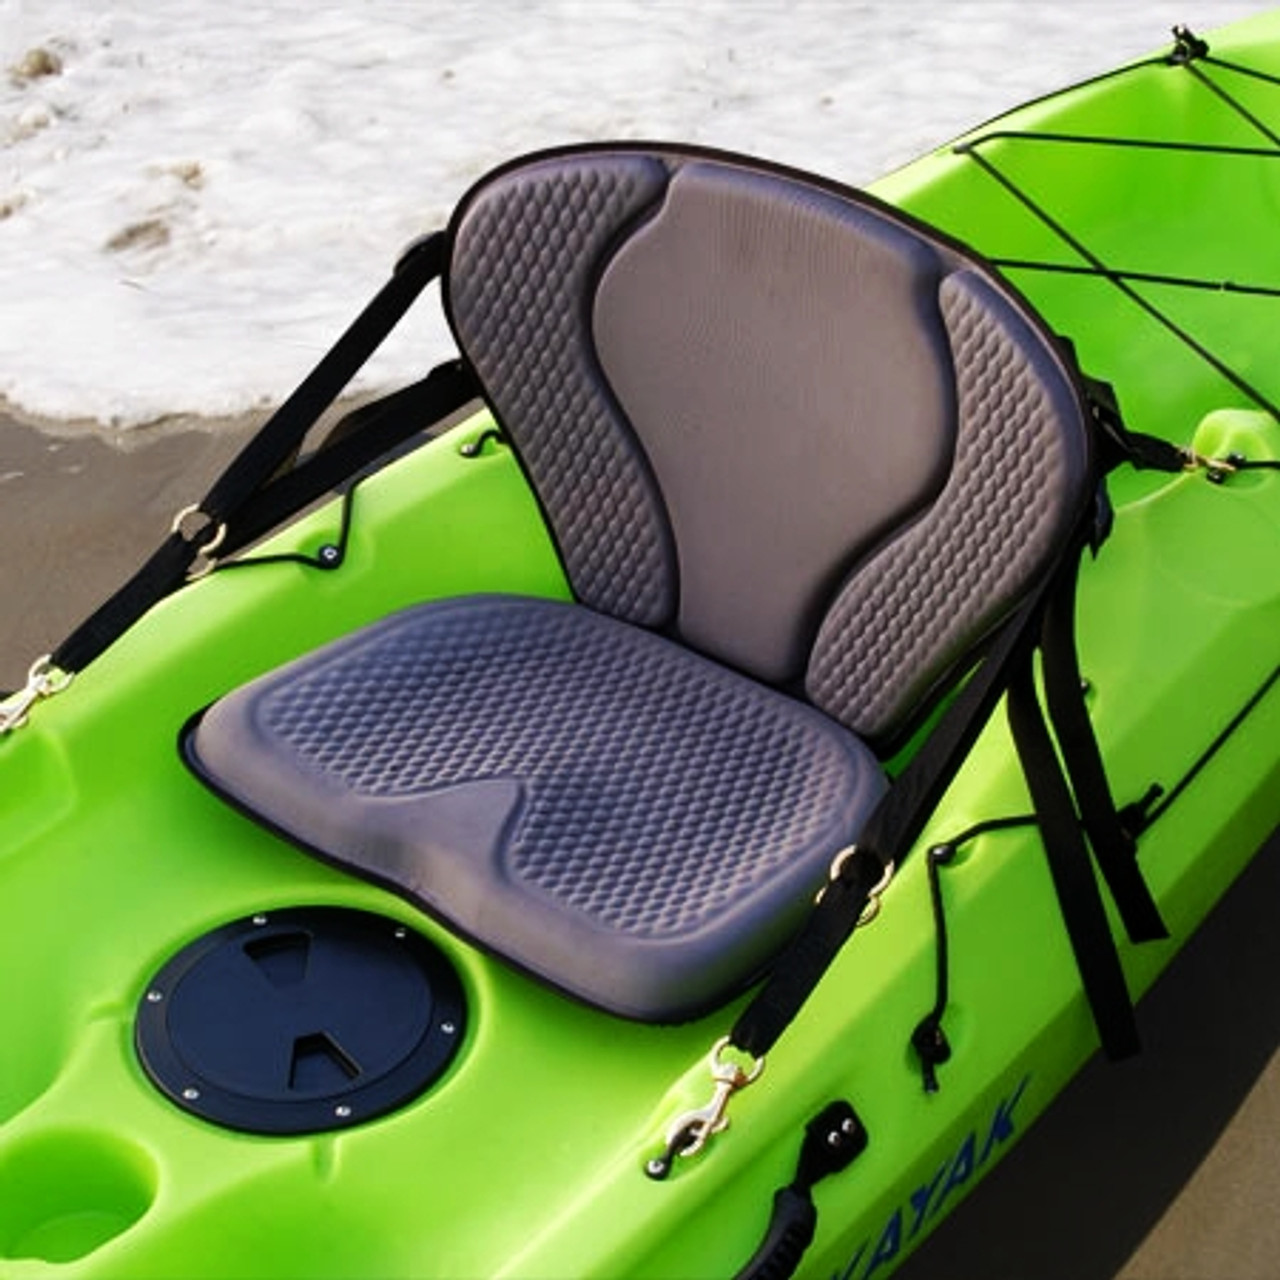 Kayak Seat - GTS Pro Molded Foam with two inch thick EVA Comfort foam pad